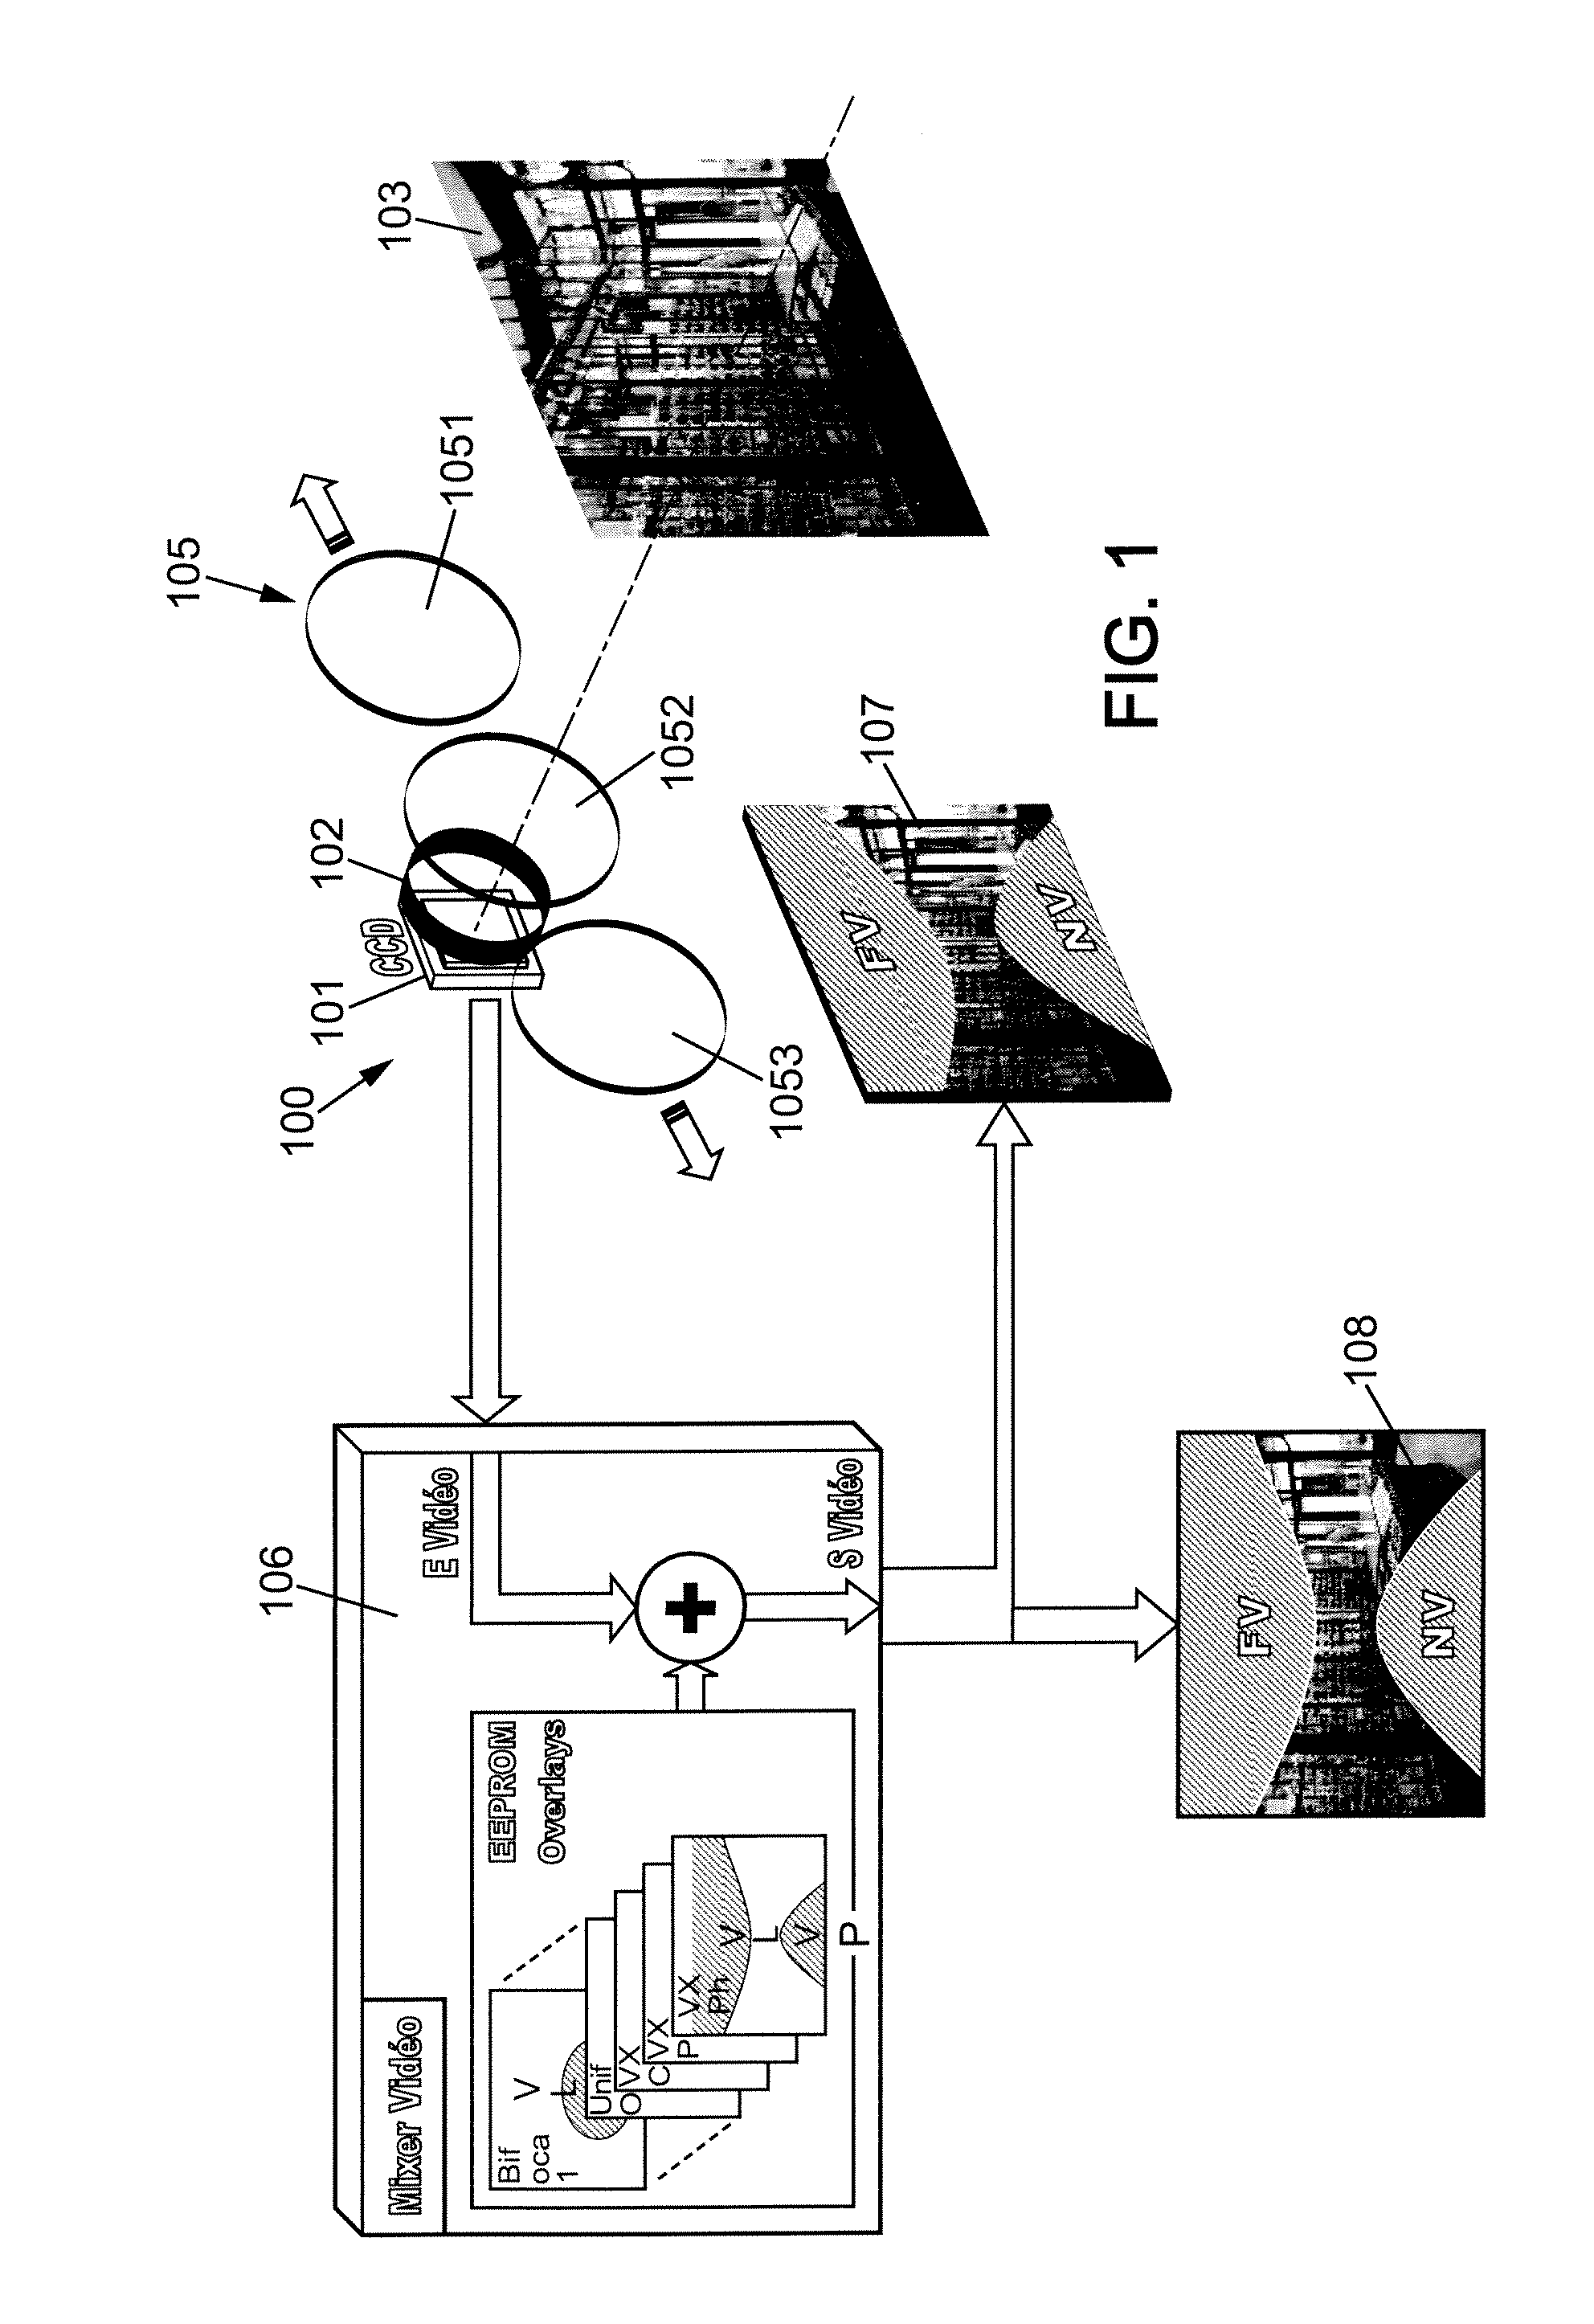 Method and Apparatus for Simulating an Optical Effect of an Optical Lens